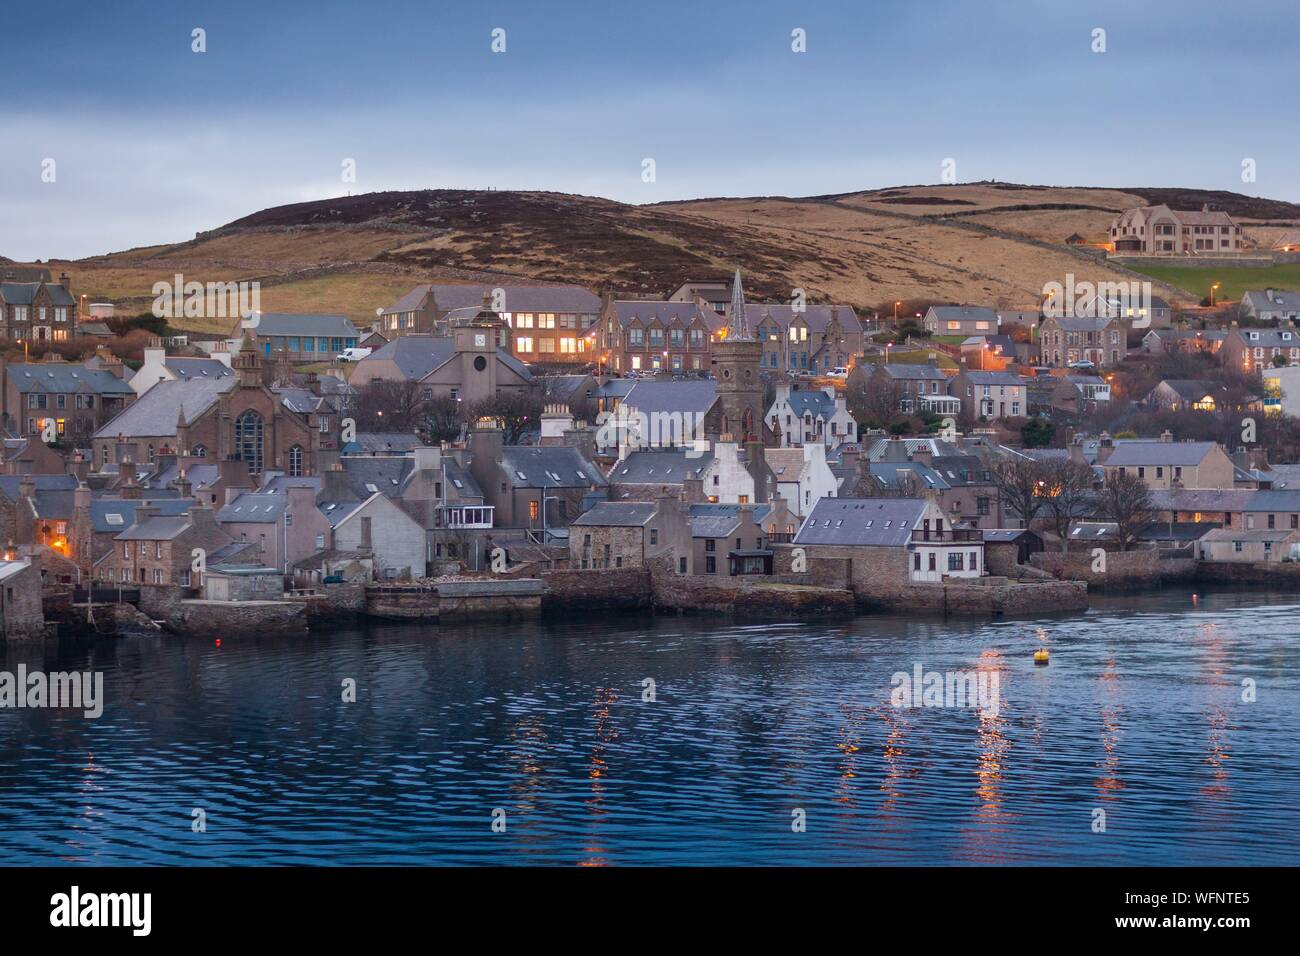 United Kingdom, Scotland, Orkney Islands, Mainland, Stromness, harbour at night, seen from departing ferry Stock Photo